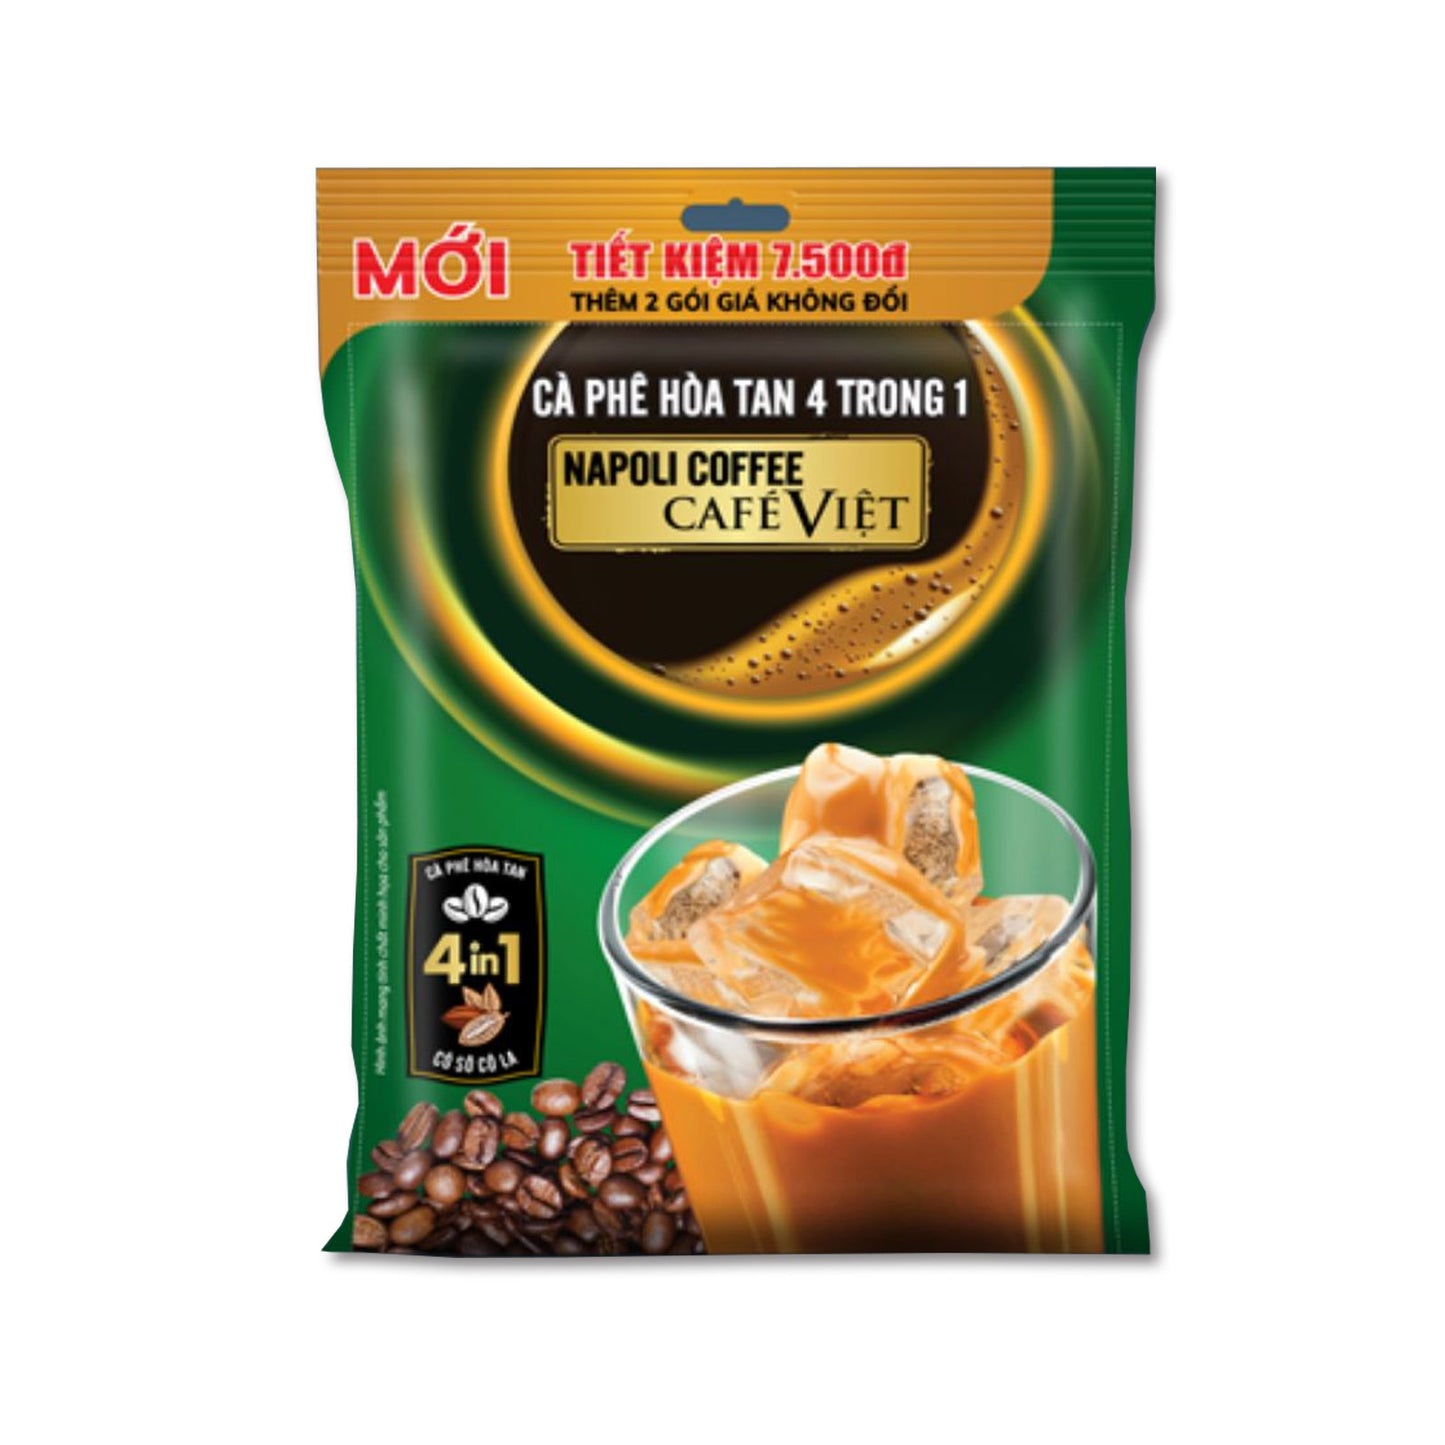 Instant coffee 4in1  (chocolate plus) by Napoli 10 packets Vietnamese Coffee